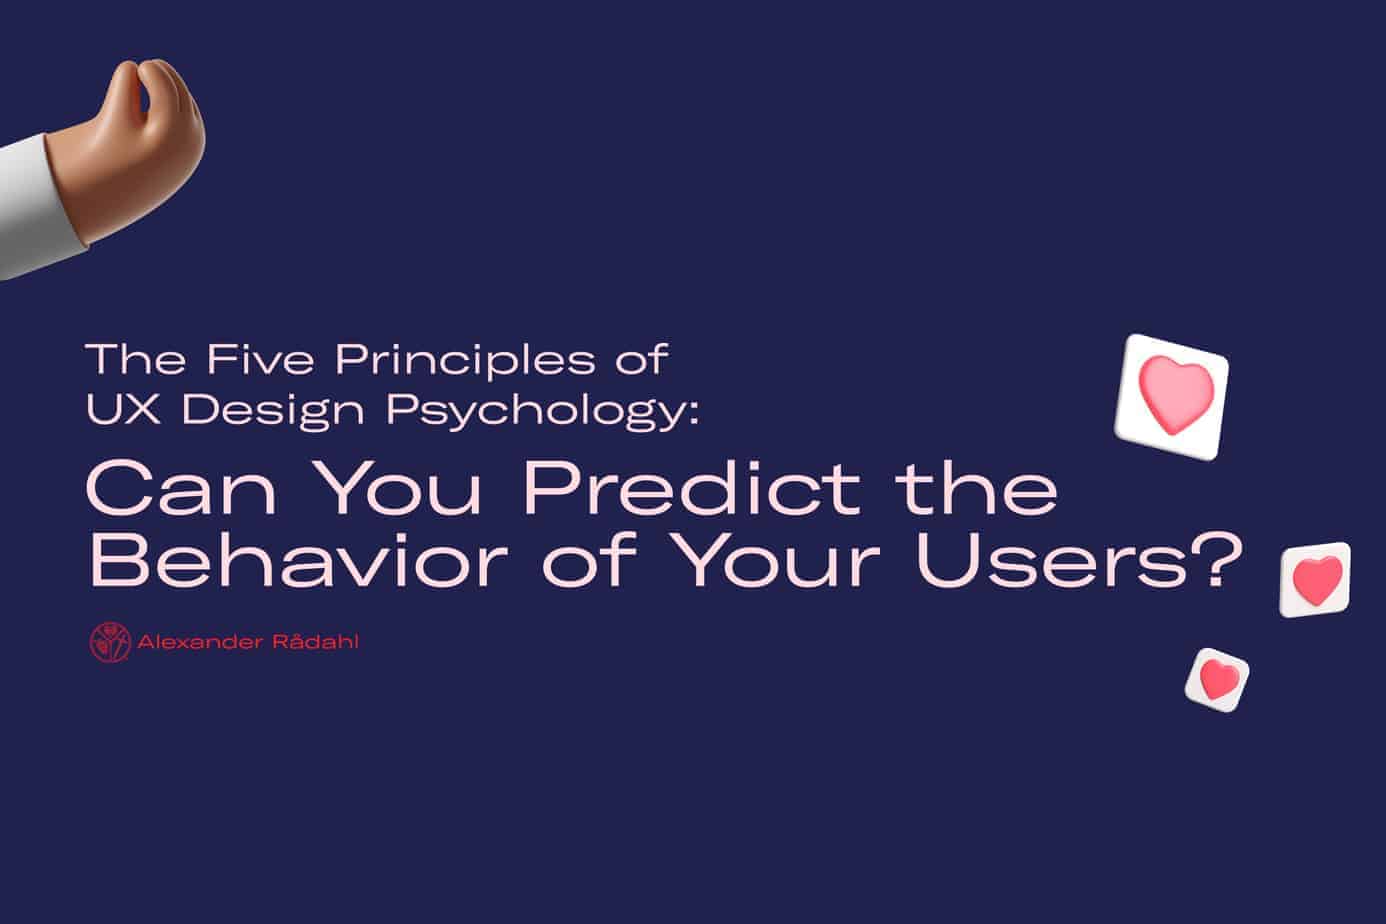 The five principles of ux design psychology: can you predict the behavior of your users?